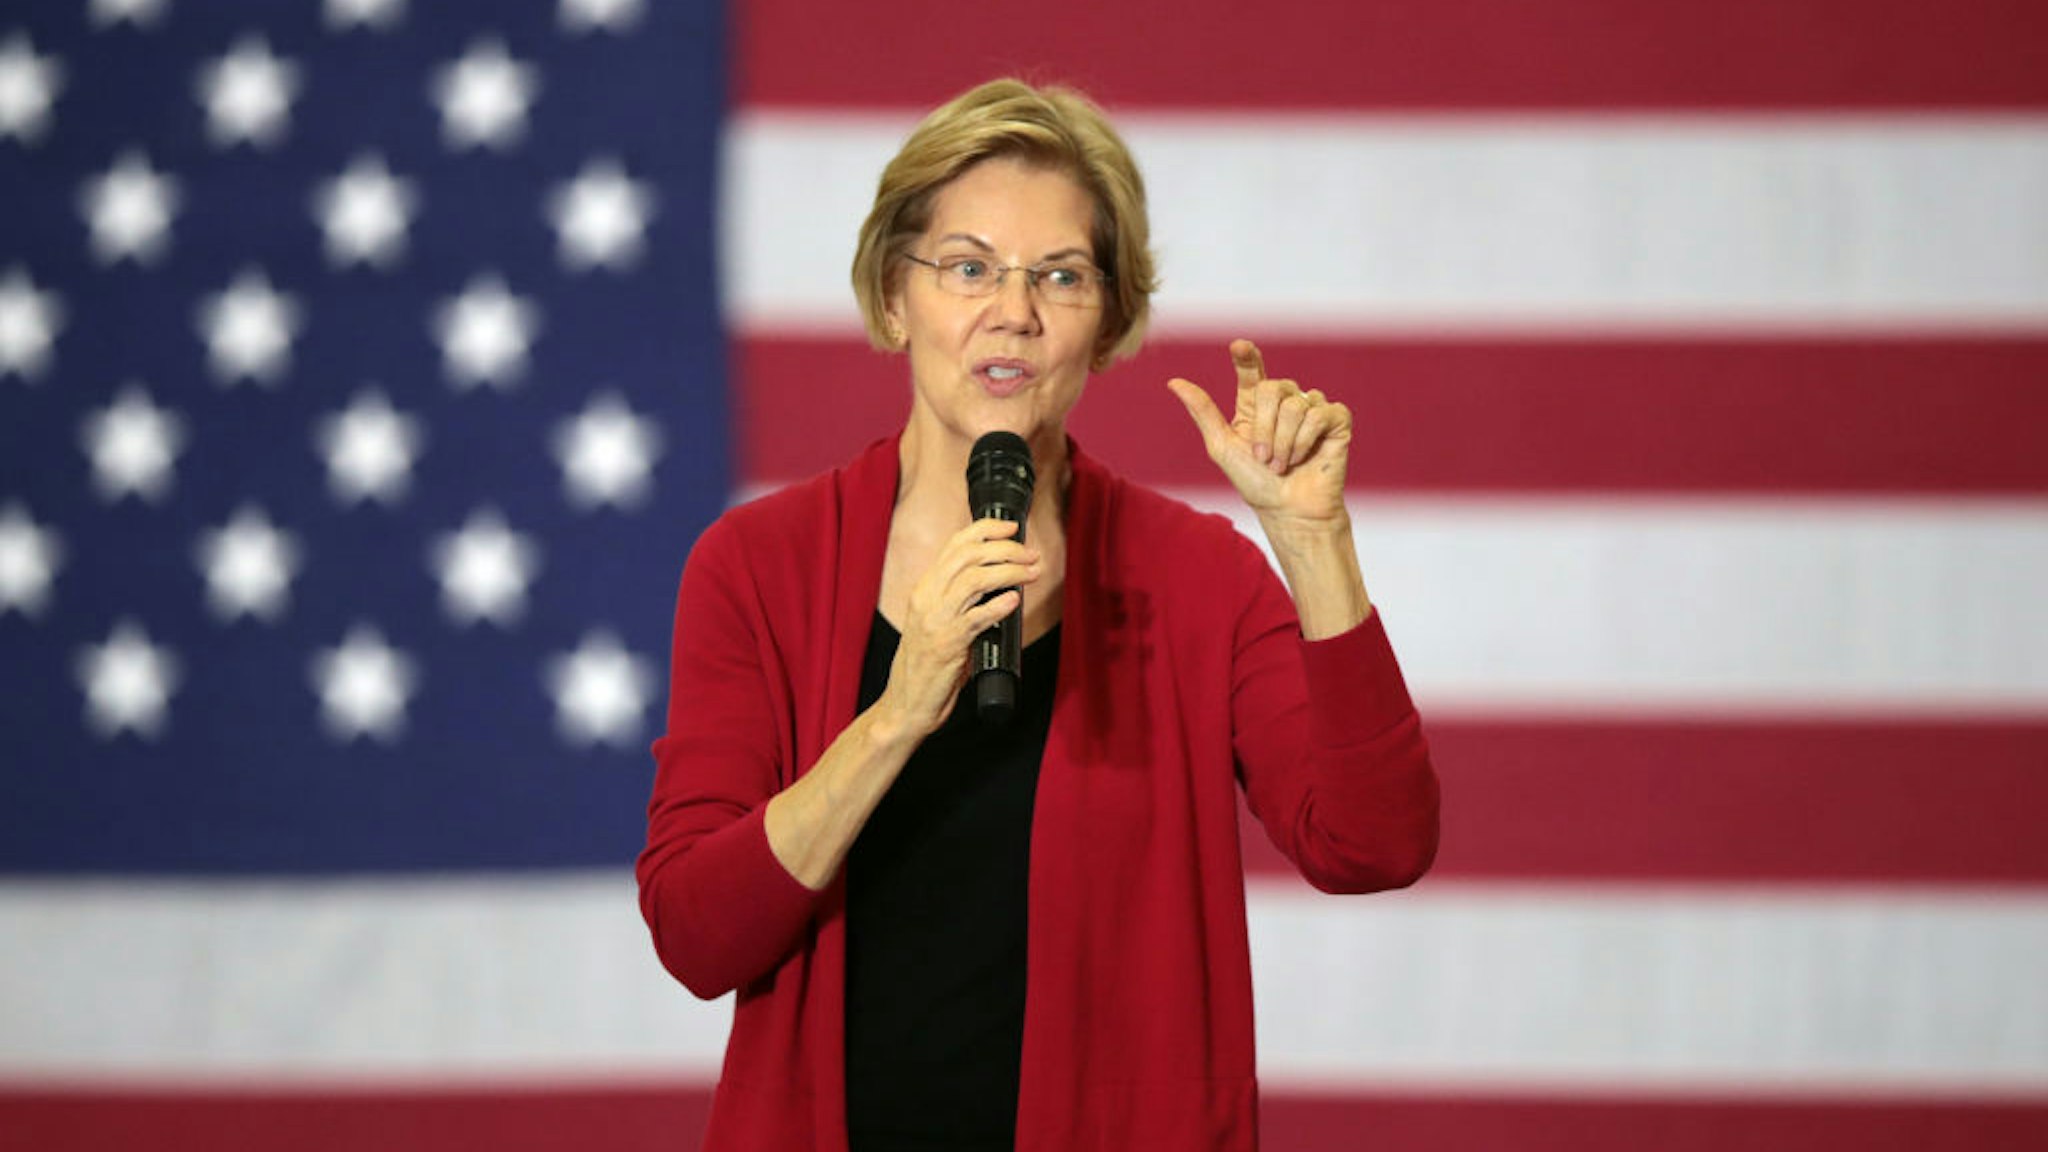 Democratic presidential candidate Sen. Elizabeth Warren (D-MA) speaks to guests during a campaign stop at Hempstead High School on November 02, 2019 in Dubuque, Iowa.